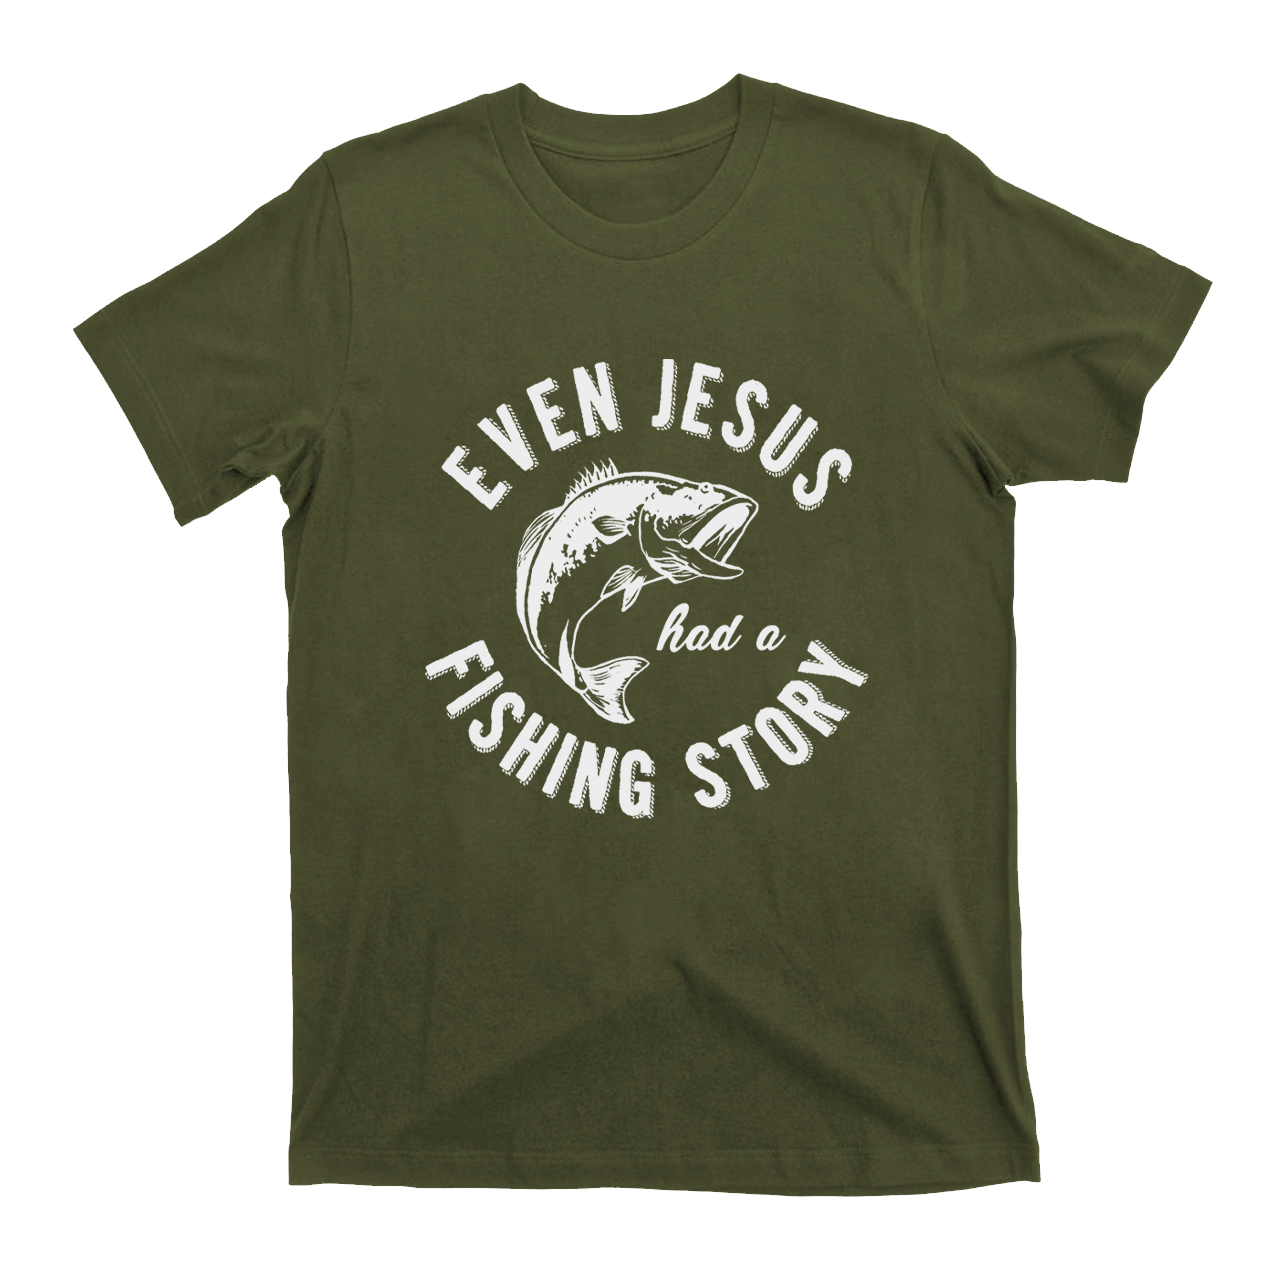 Even Jesus Had A Fishing Story T-Shirts